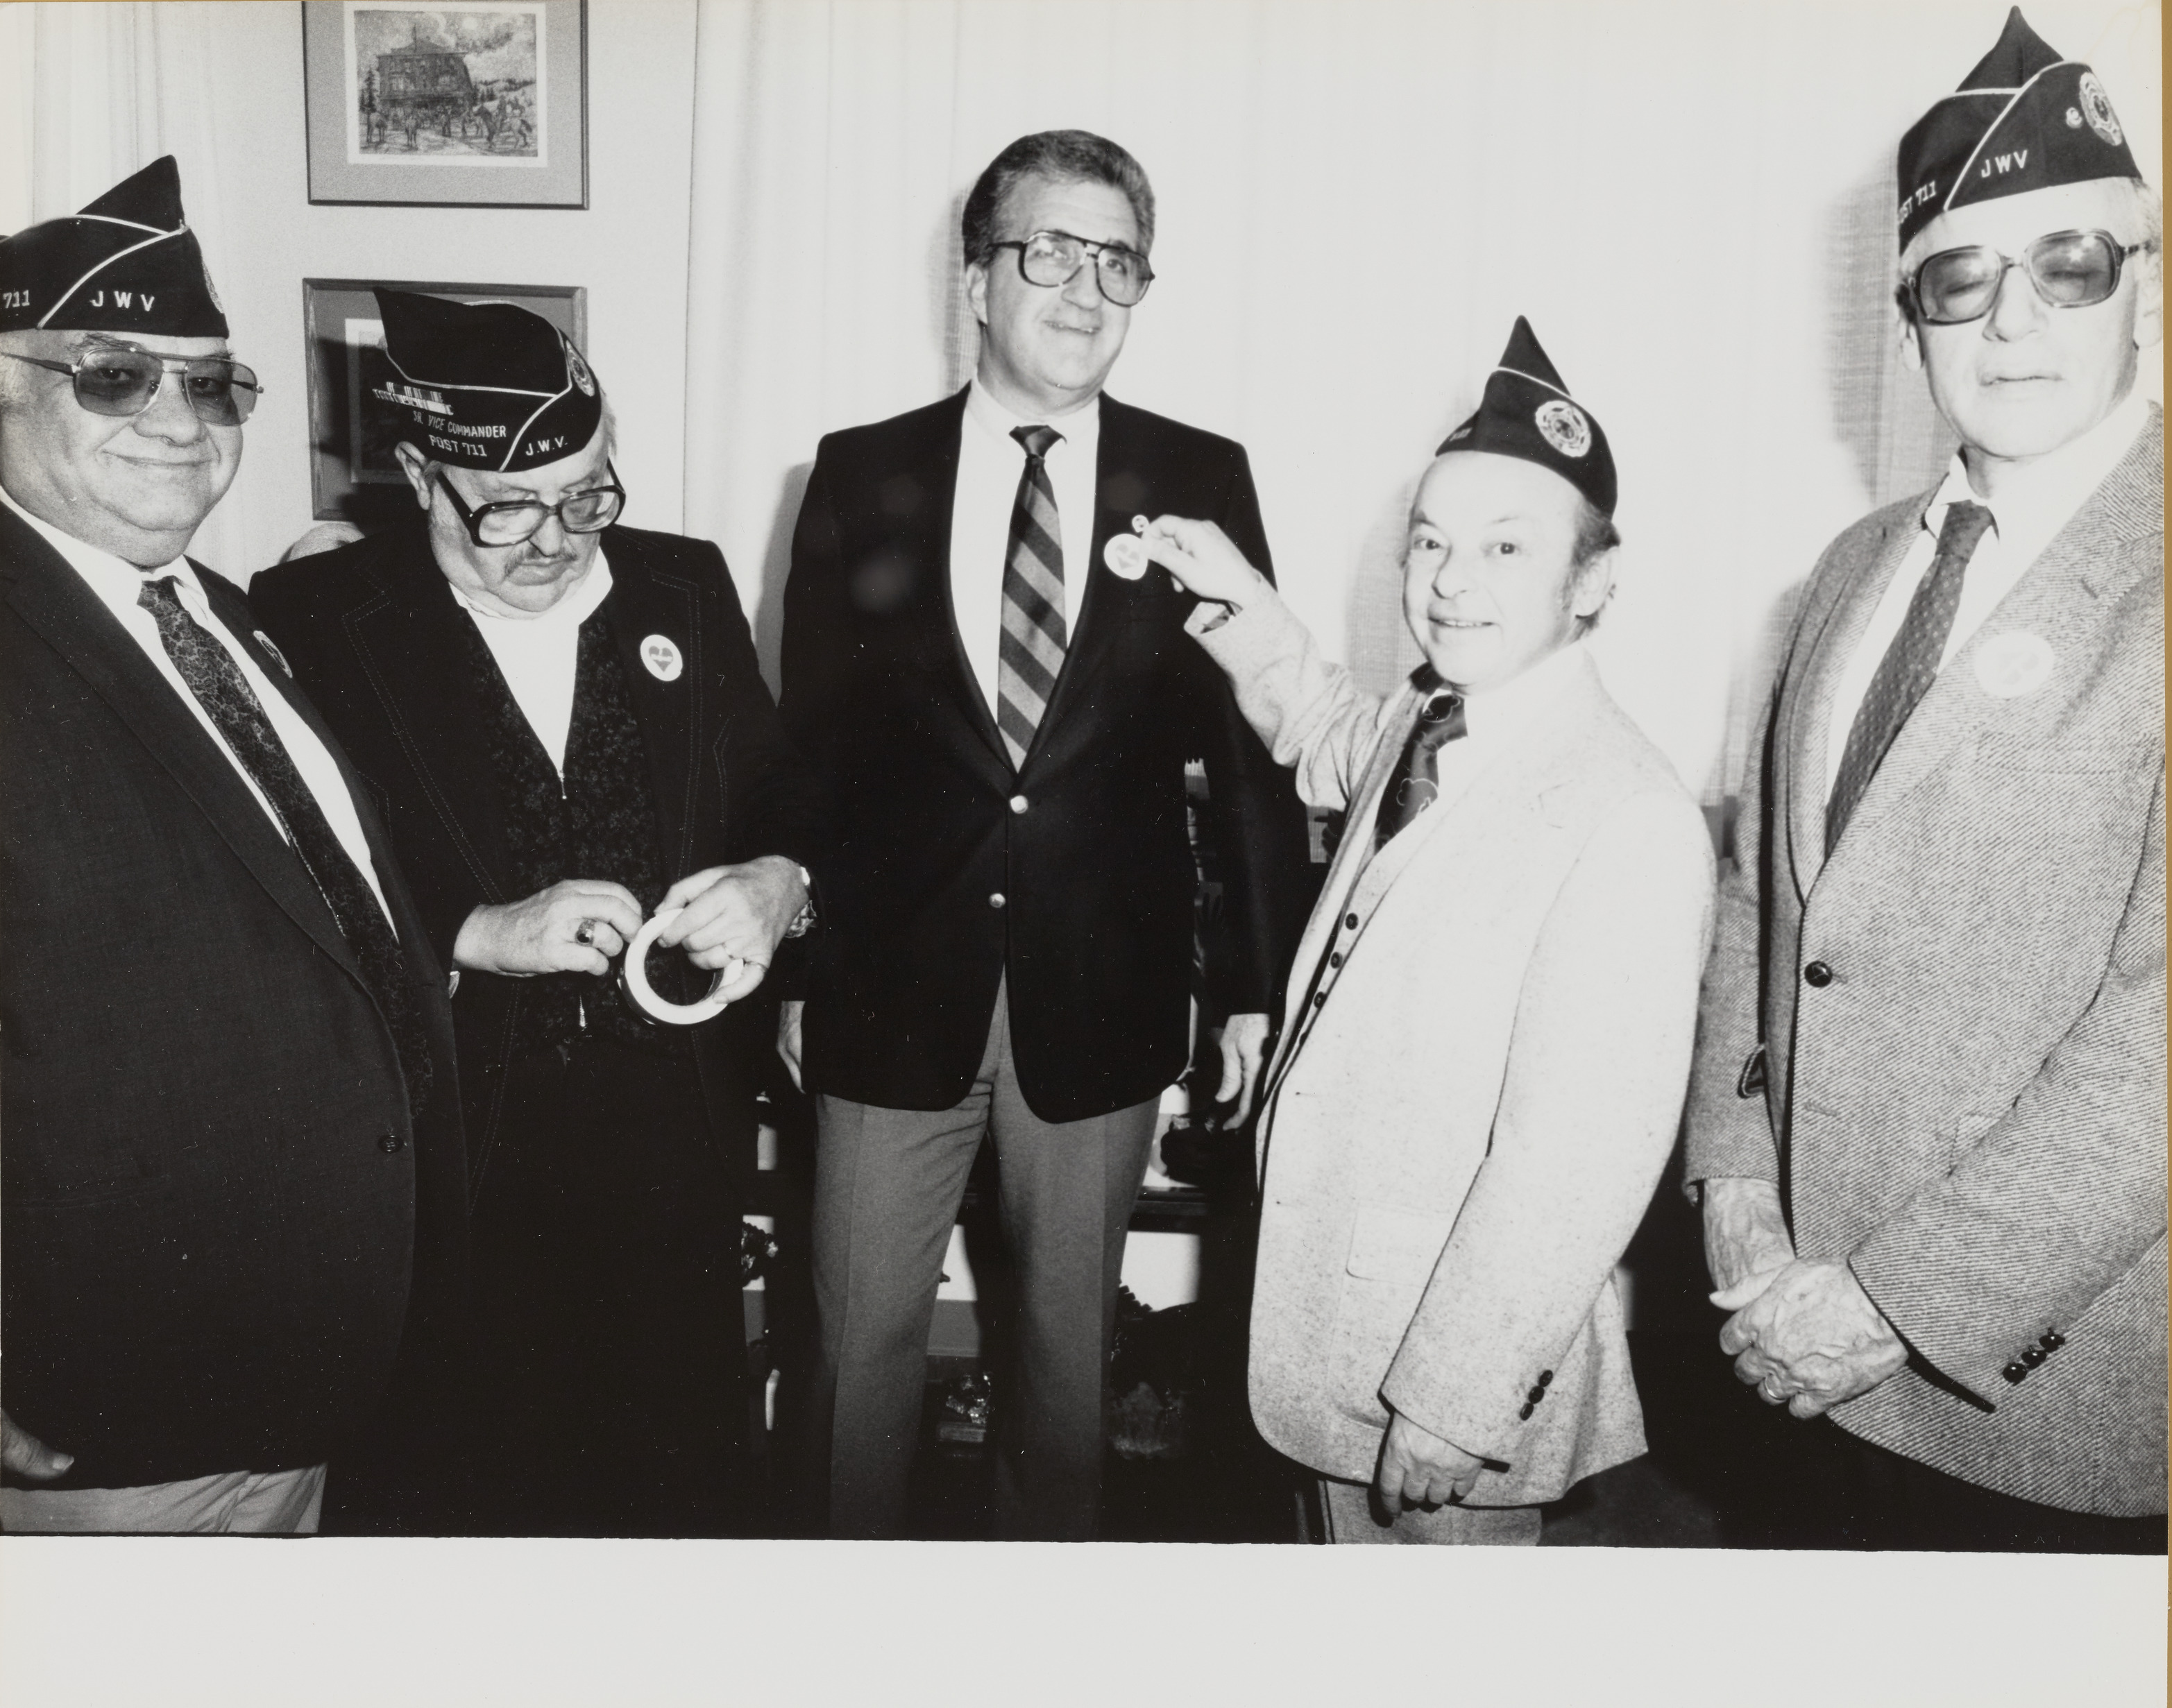 Photograph of Ron Lurie getting a pin from J.W.V. Post 11 (Jewish War Veterans), 1990